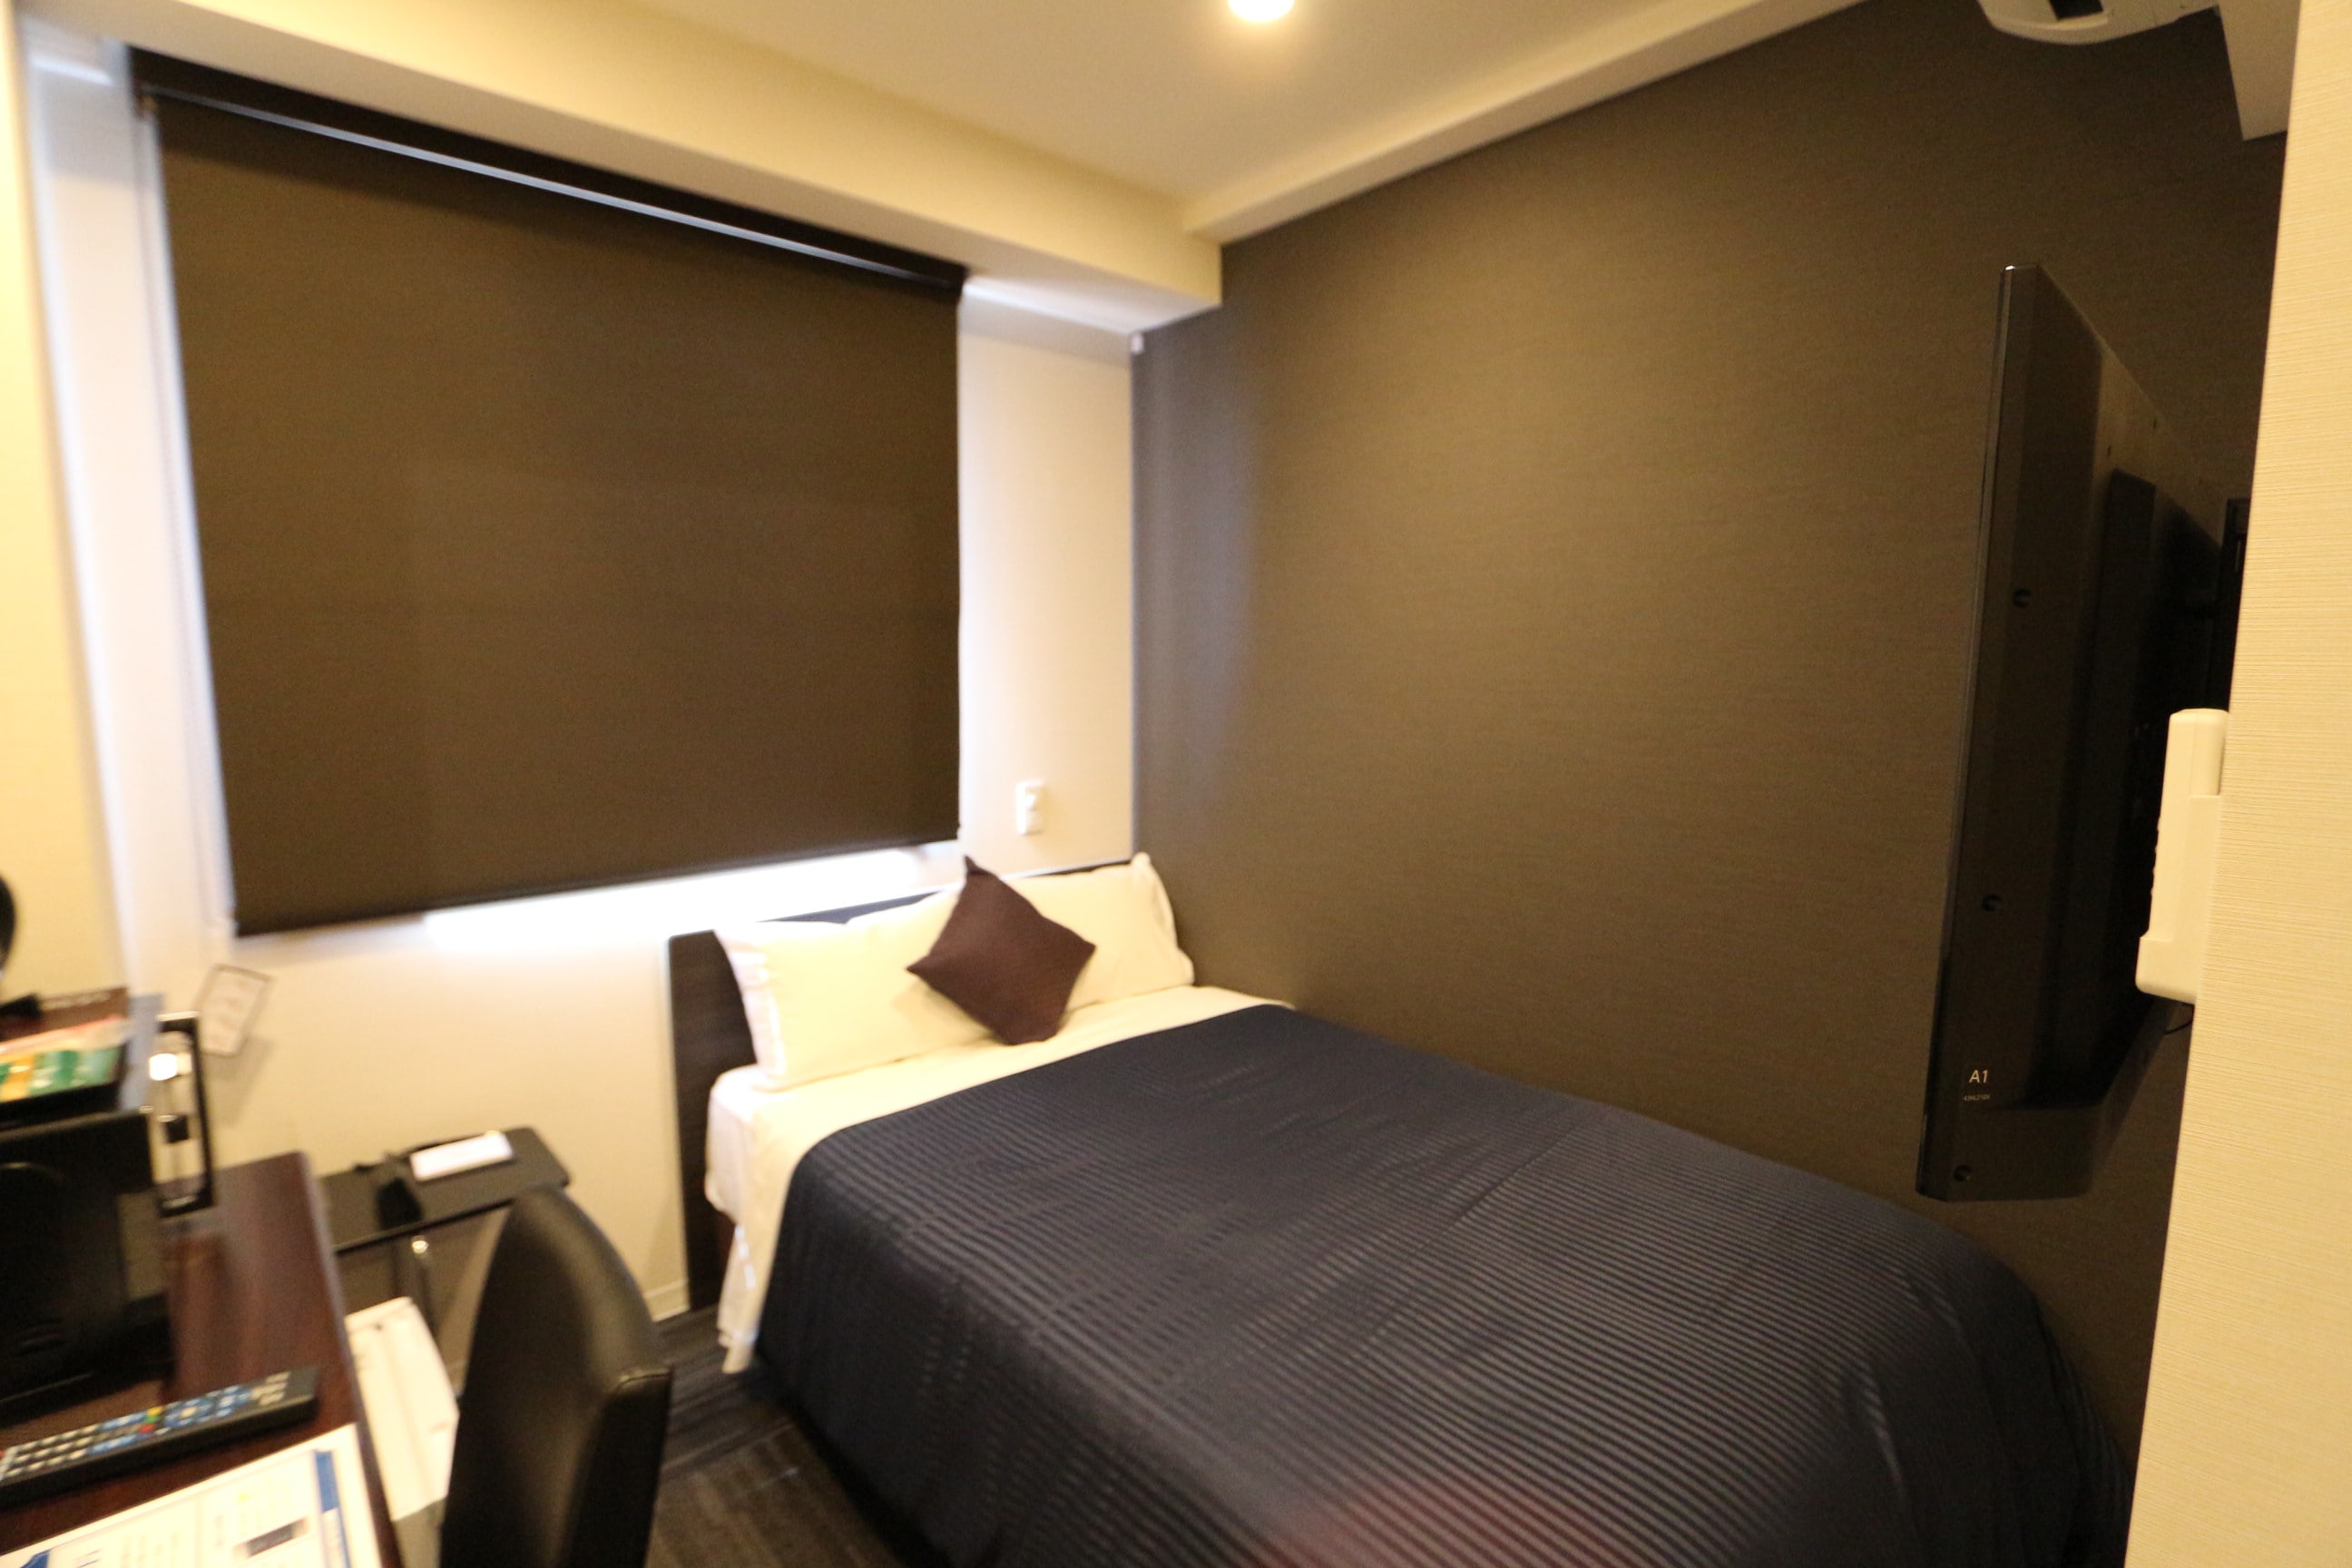 ◆ Single room ◆ Area: 11㎡ Bed size: 120 & times; 195cm